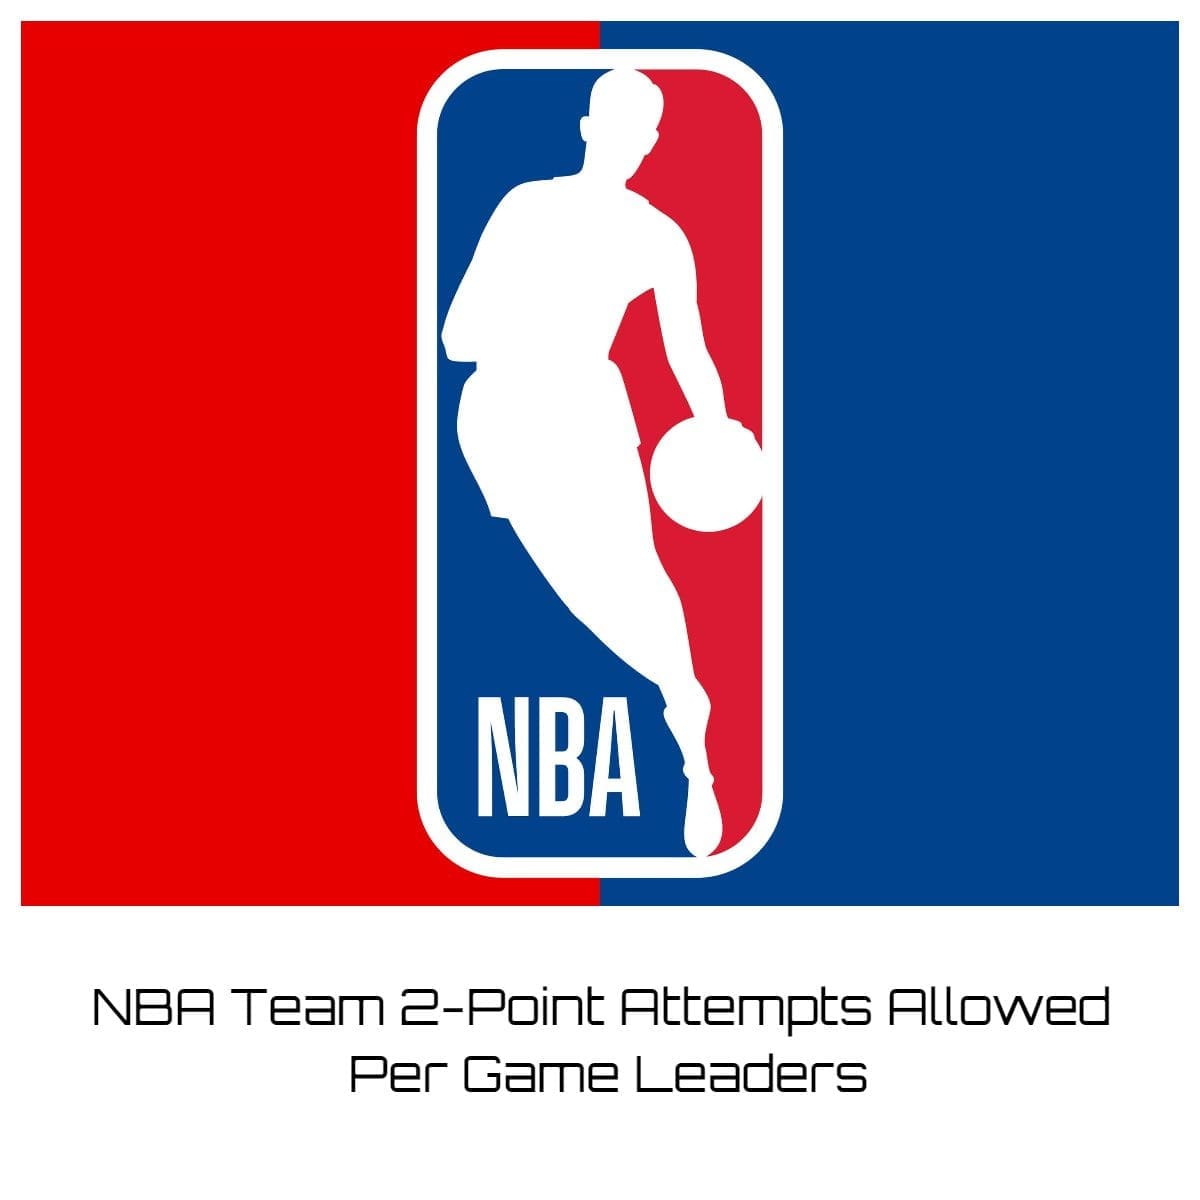 NBA Team 2-Point Attempts Allowed Per Game Leaders